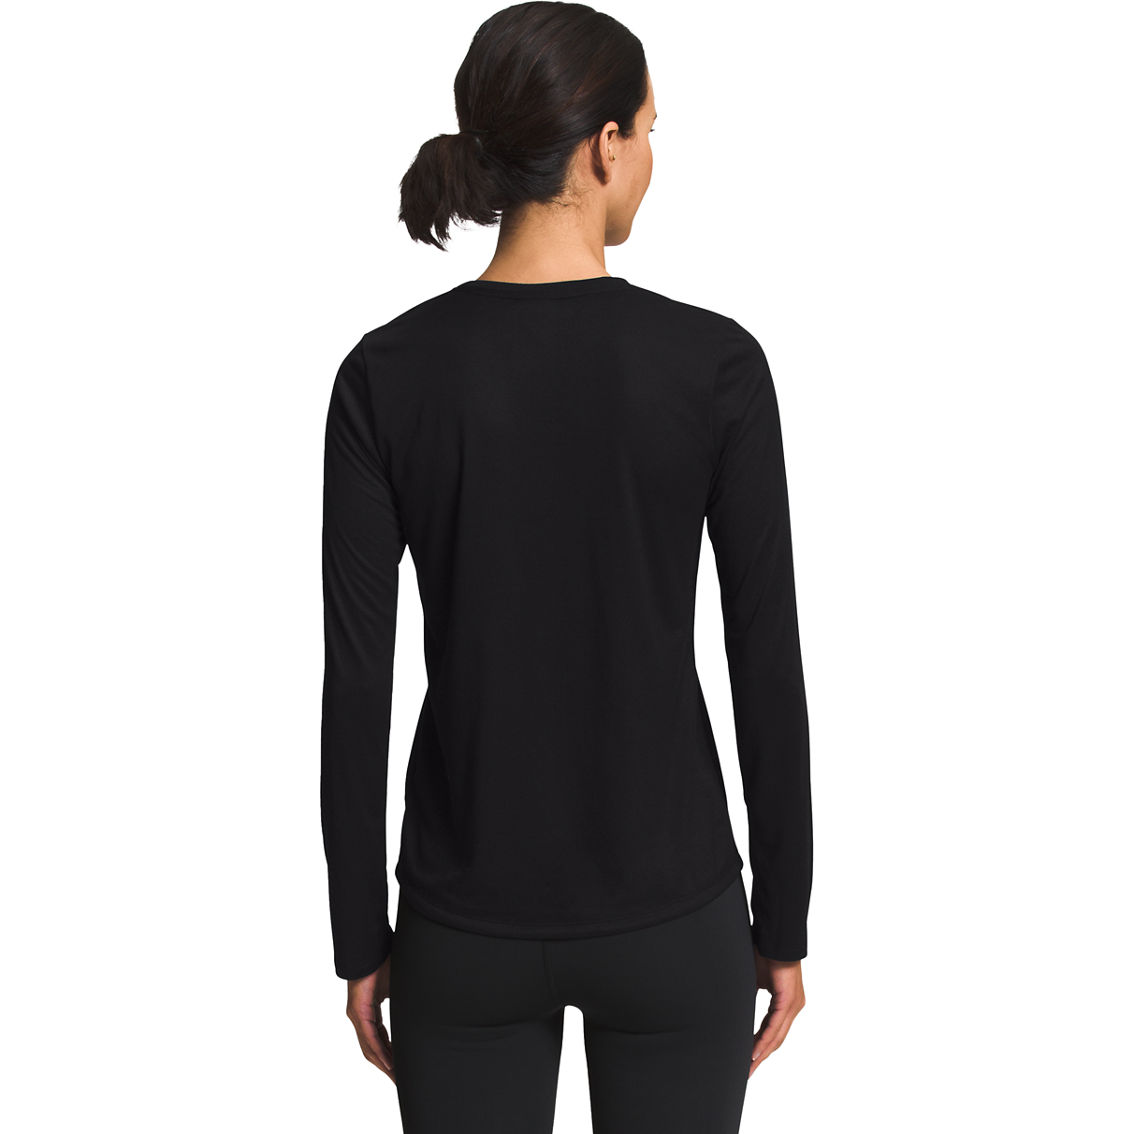 The North Face Elevation Shirt - Image 6 of 7